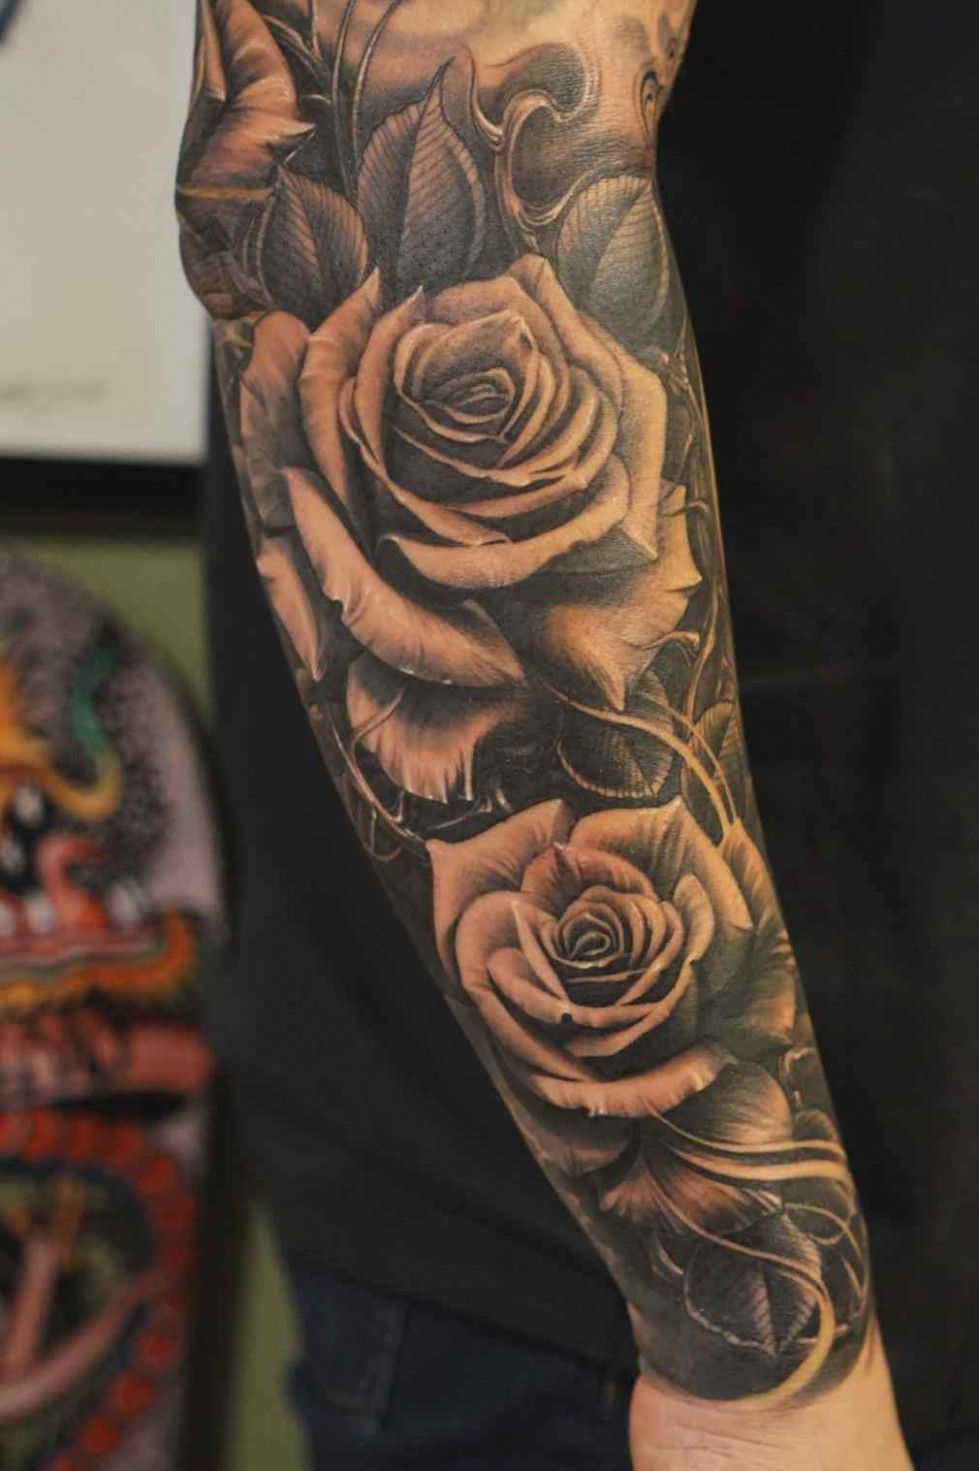 Emejing Mens Half Sleeve Tattoos Images Tattoos Rose Tattoos intended for size 979 X 1471